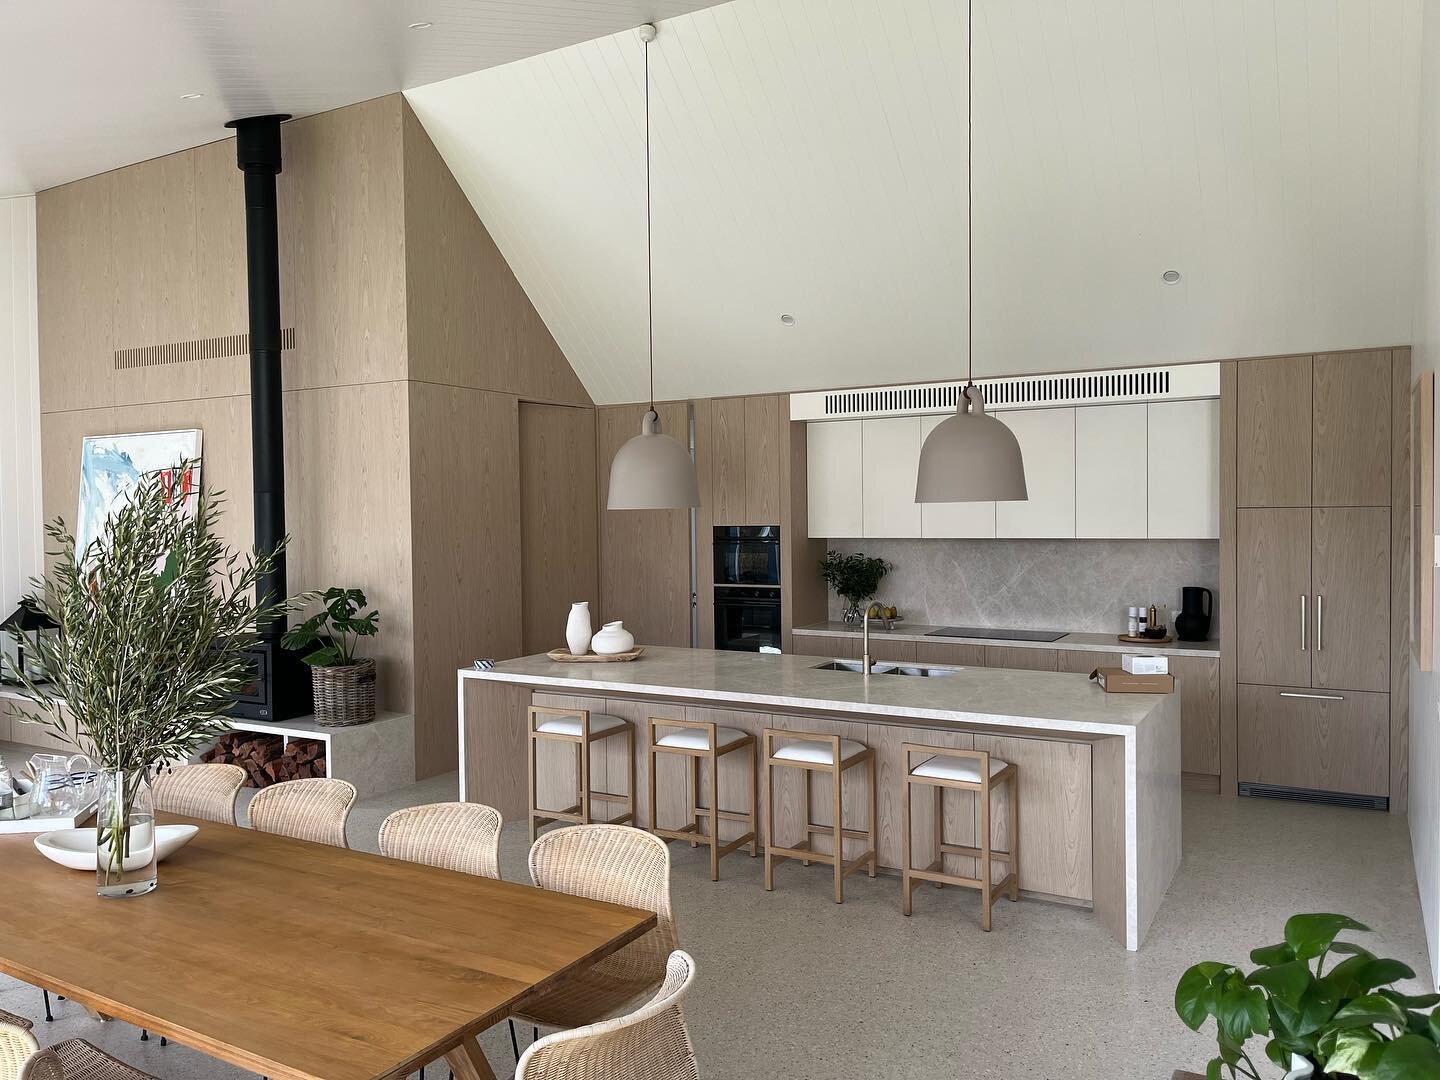 Inverness st kitchen and wall paneling for @lamerton.build 
Looking unreal..